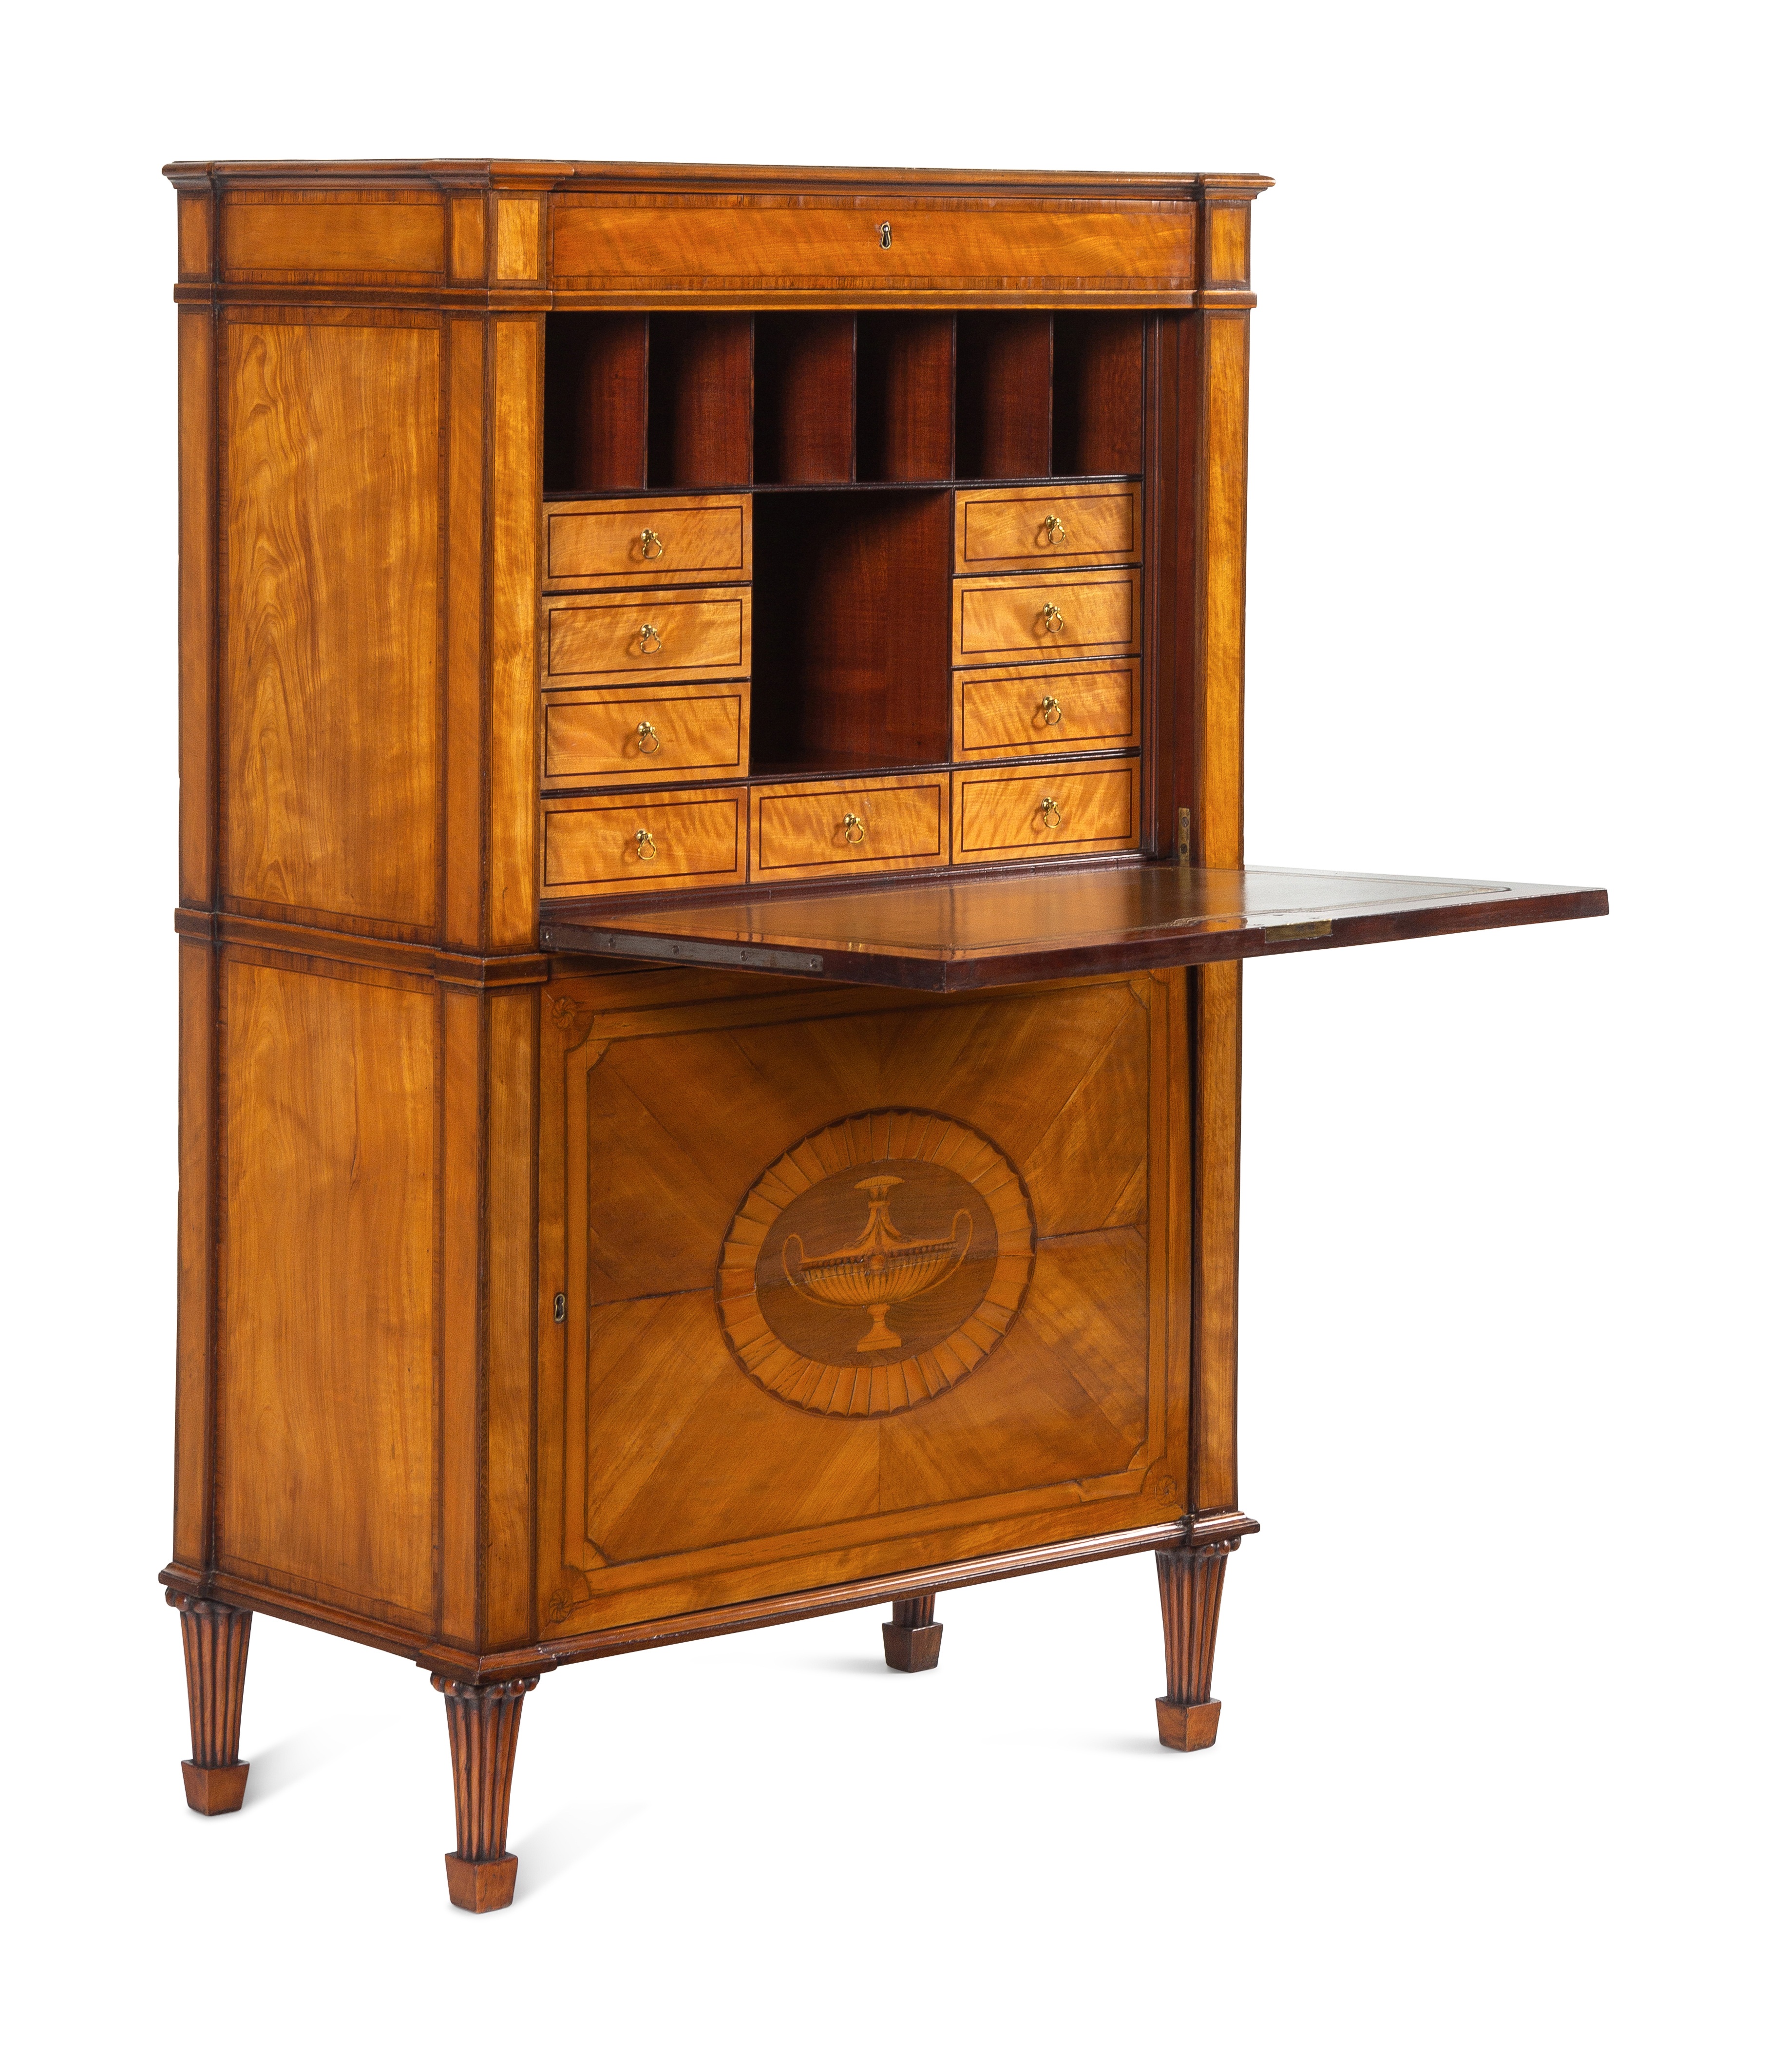 A George III Satinwood, Tulipwood and Amaranth Marquetry Fall-Front Secretaire - Image 2 of 11